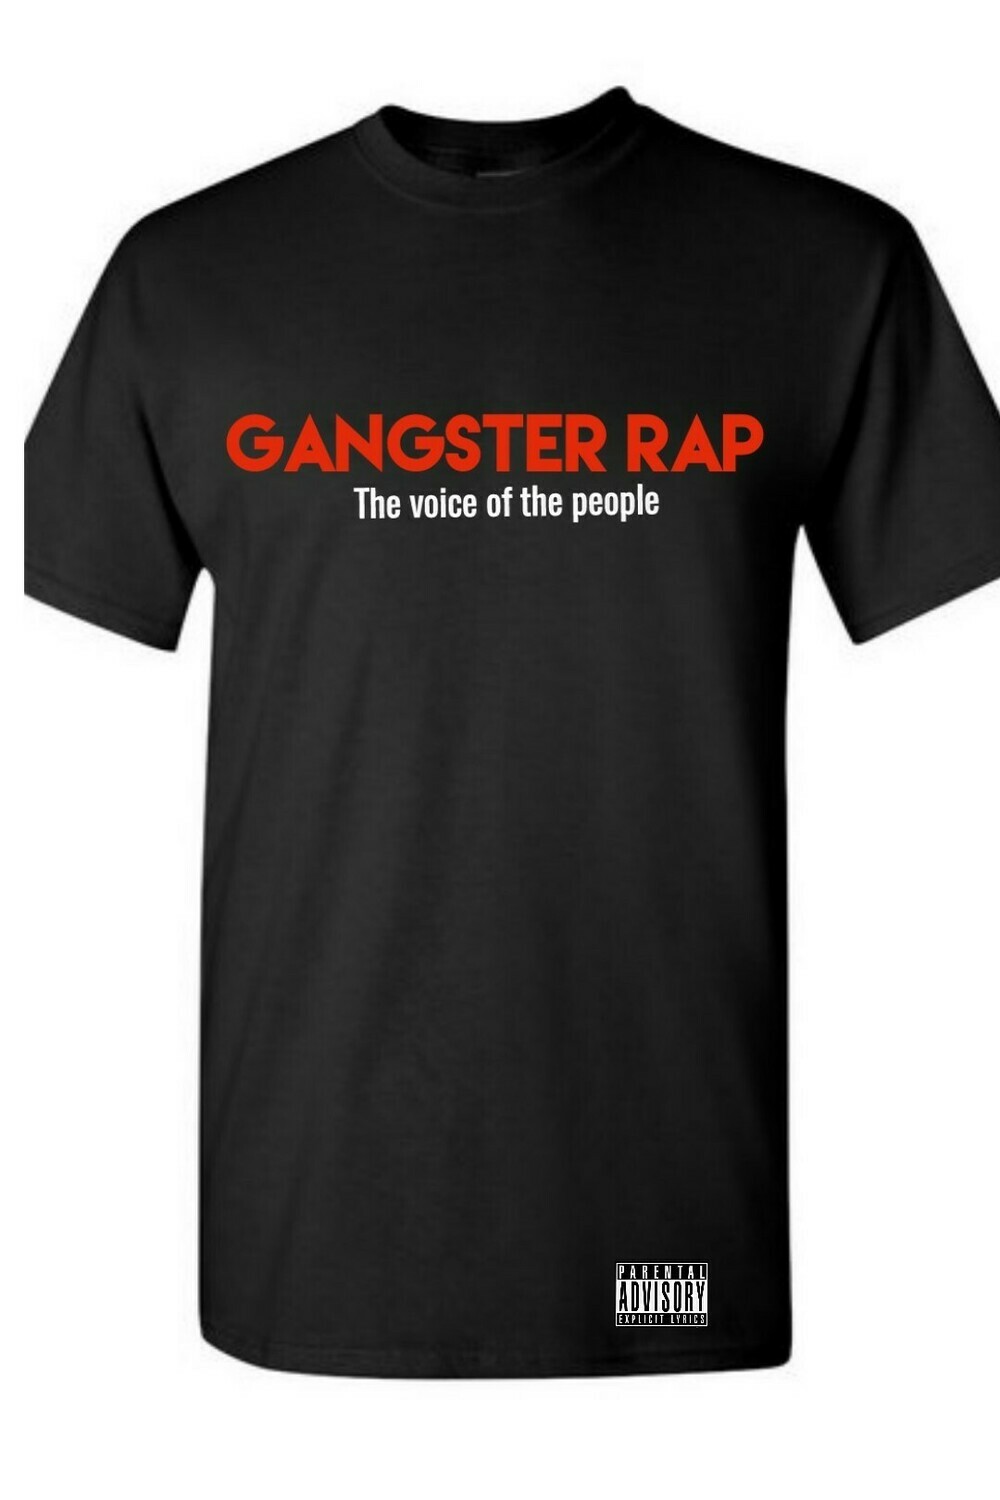 OG G RAP VOICE OF THE PEOPLE TSHIRT